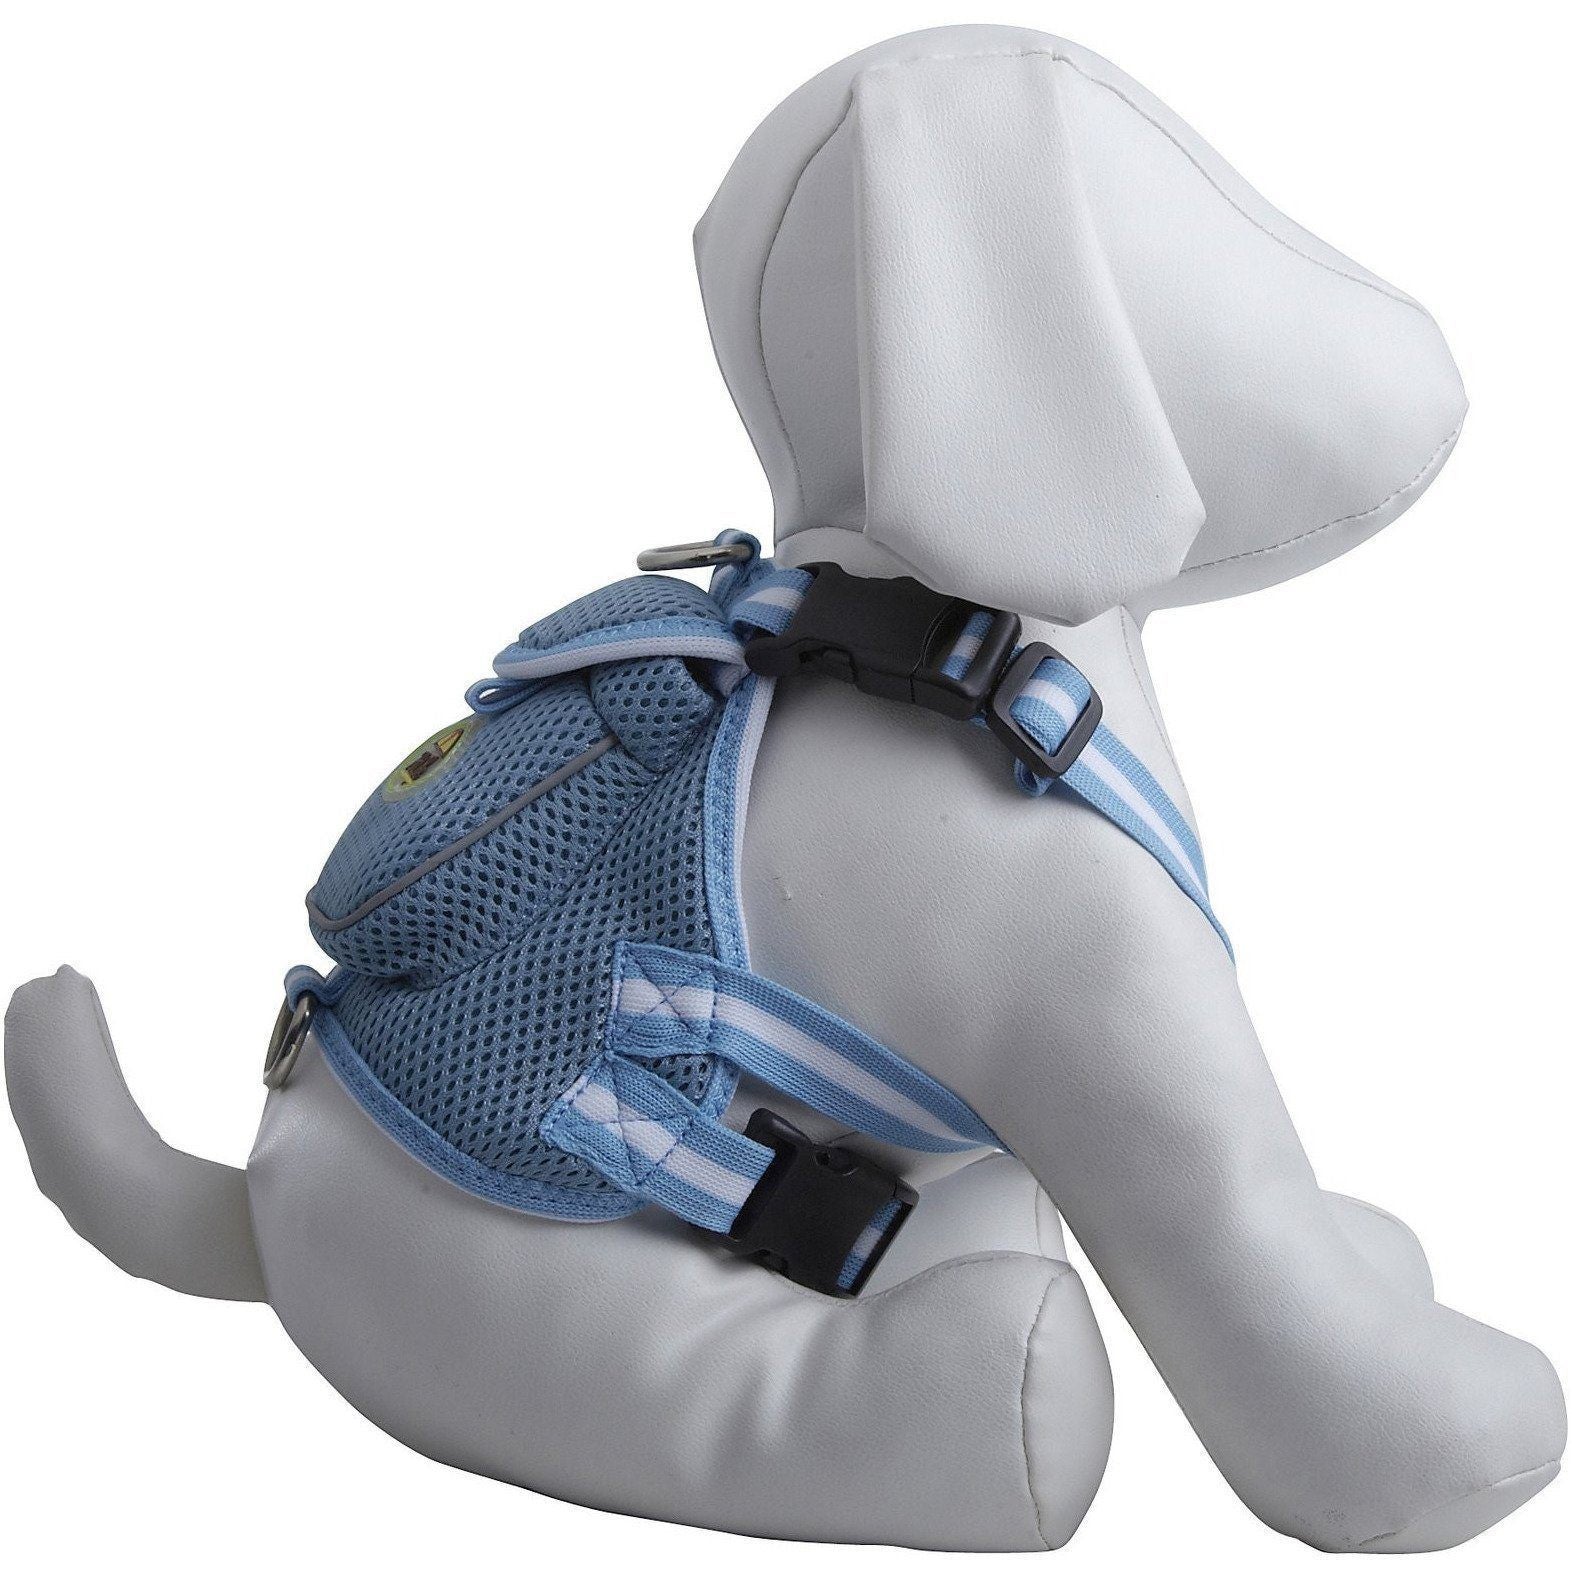 Pet Life ® 'Pocket Bark' Reflective Adjustable Fashion Pet Dog Harness w/ Hook-and-Loop Pouch and Dual Harness Rings Small Blue